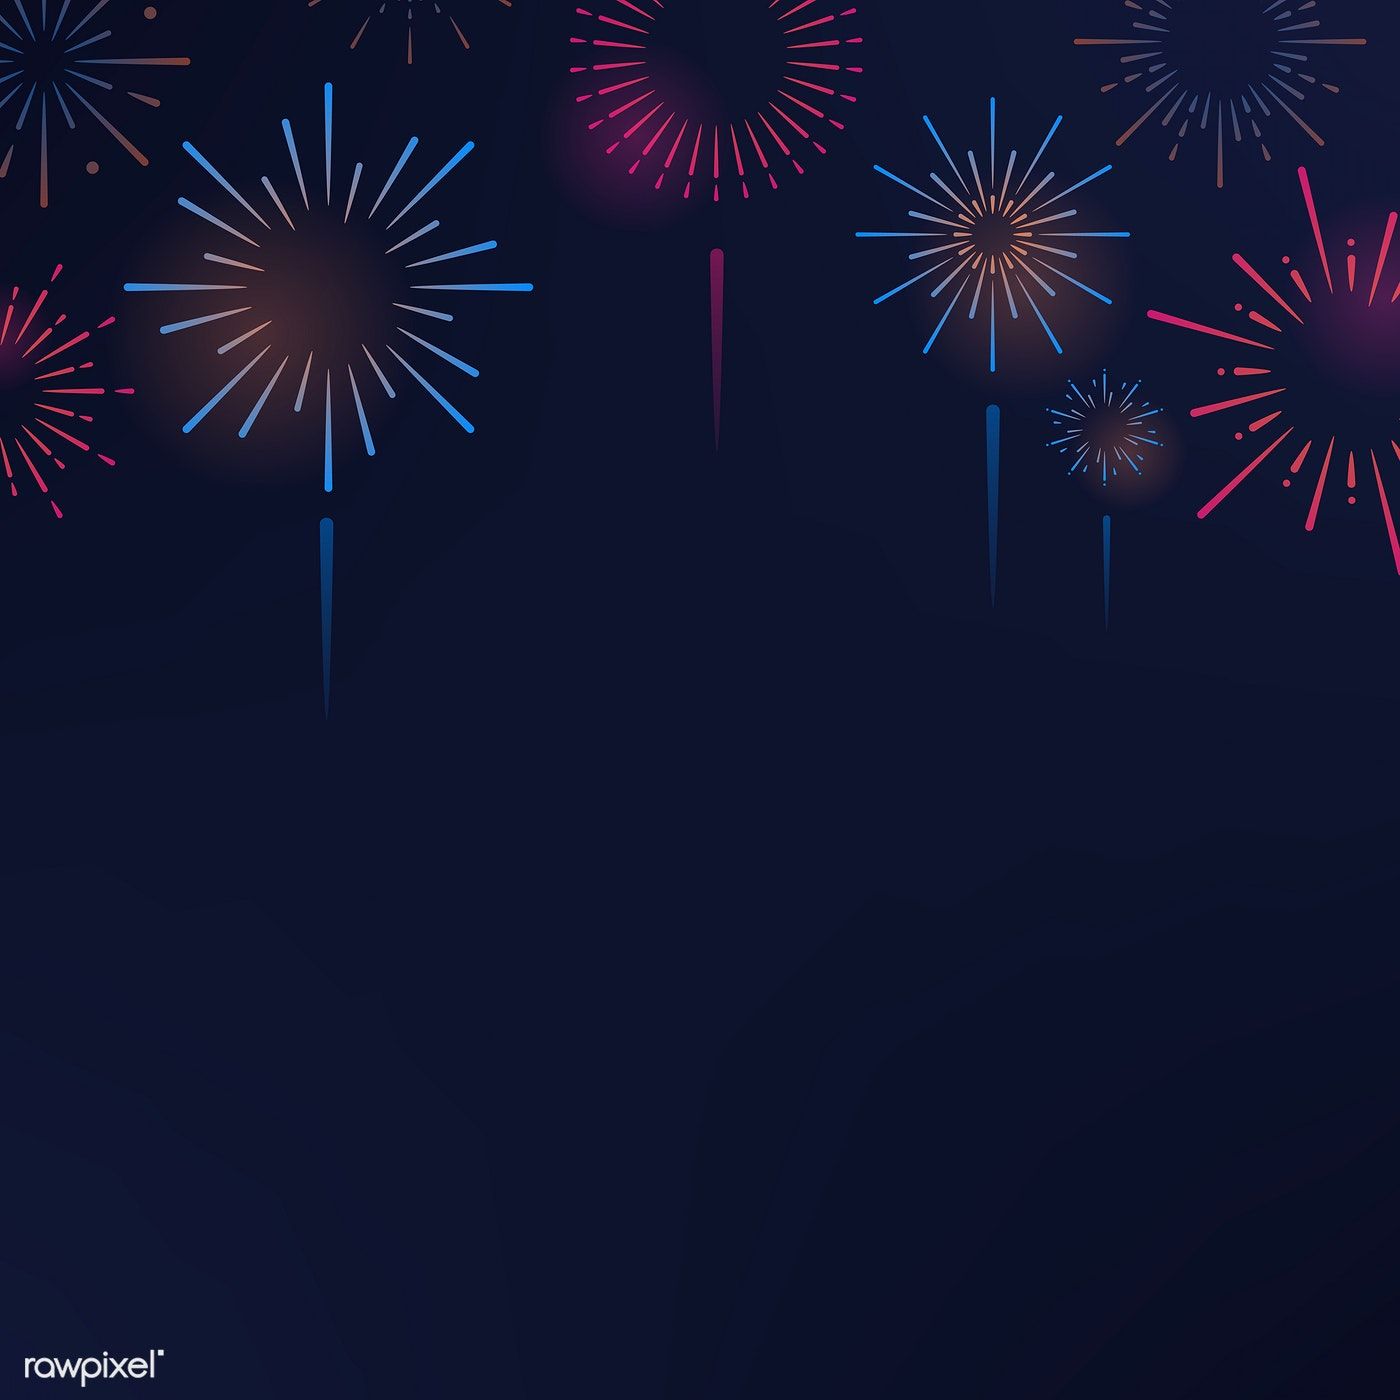 Firework Explosions Background Design Vector Image By